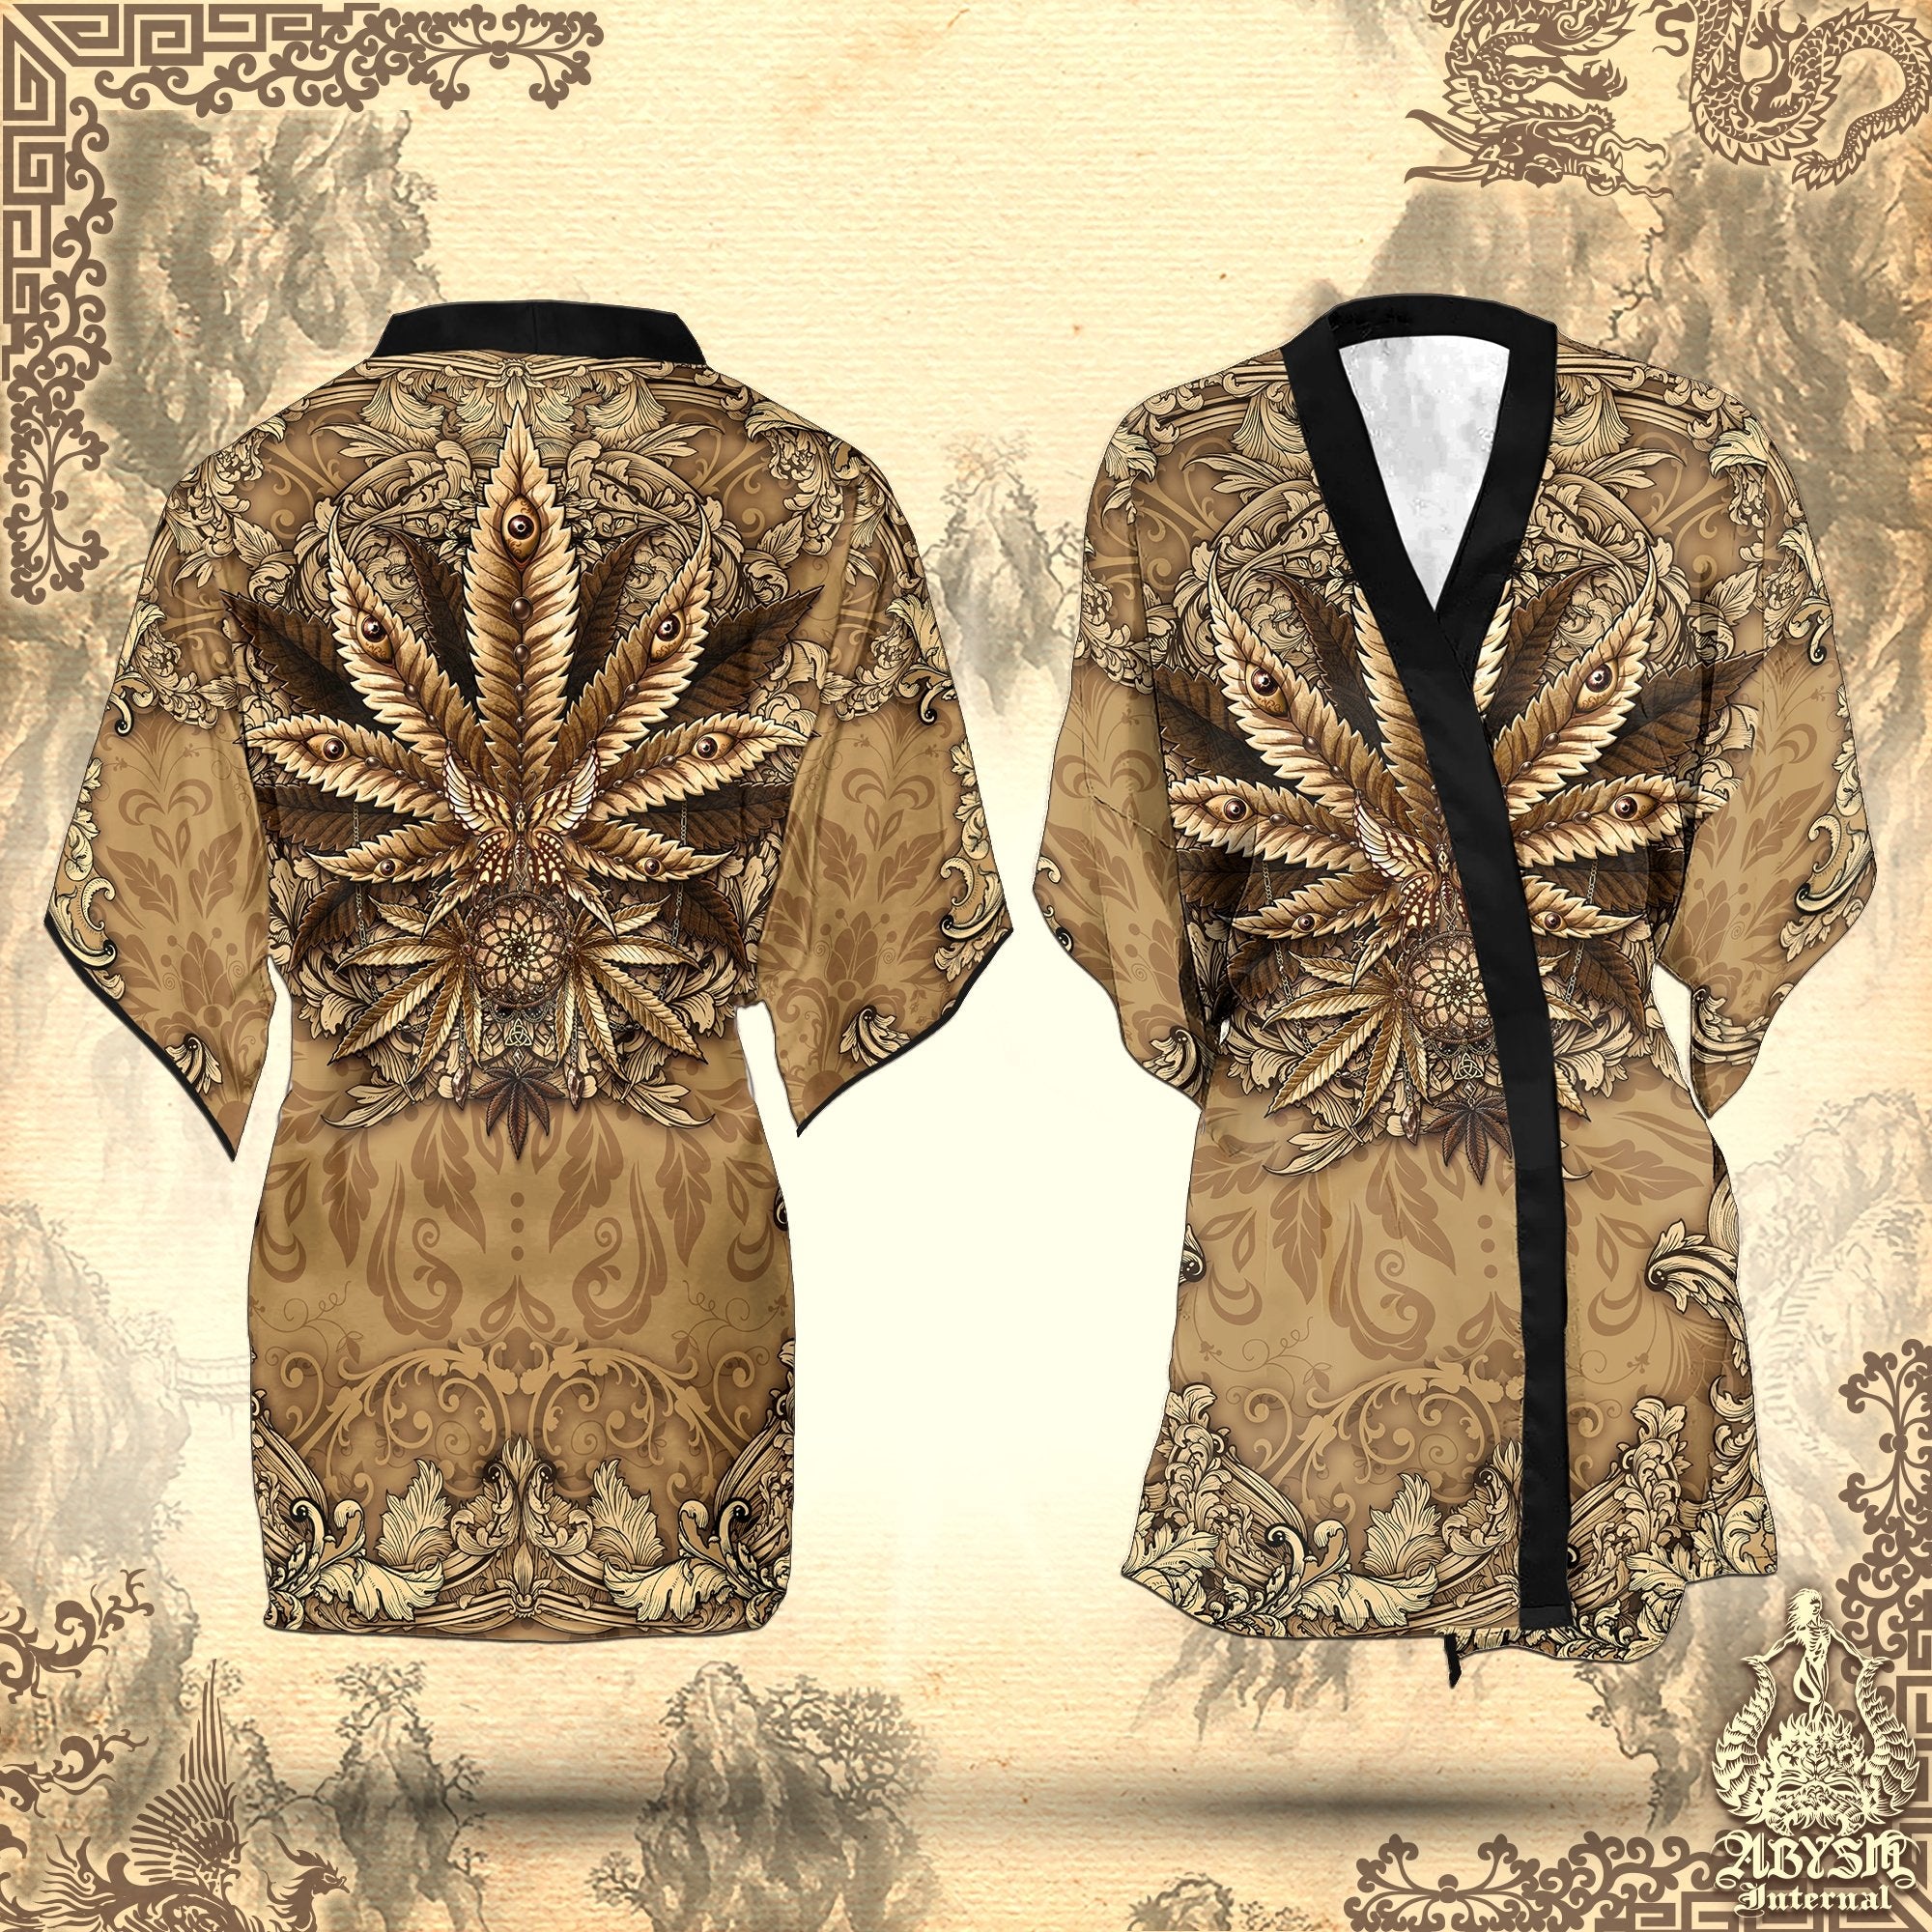 Weed Cover Up, Cannabis Outfit, Hippie Party Kimono, Indie Summer Festival Robe, 420 Gift, Alternative Clothing, Unisex - Marijuana, Cream - Abysm Internal